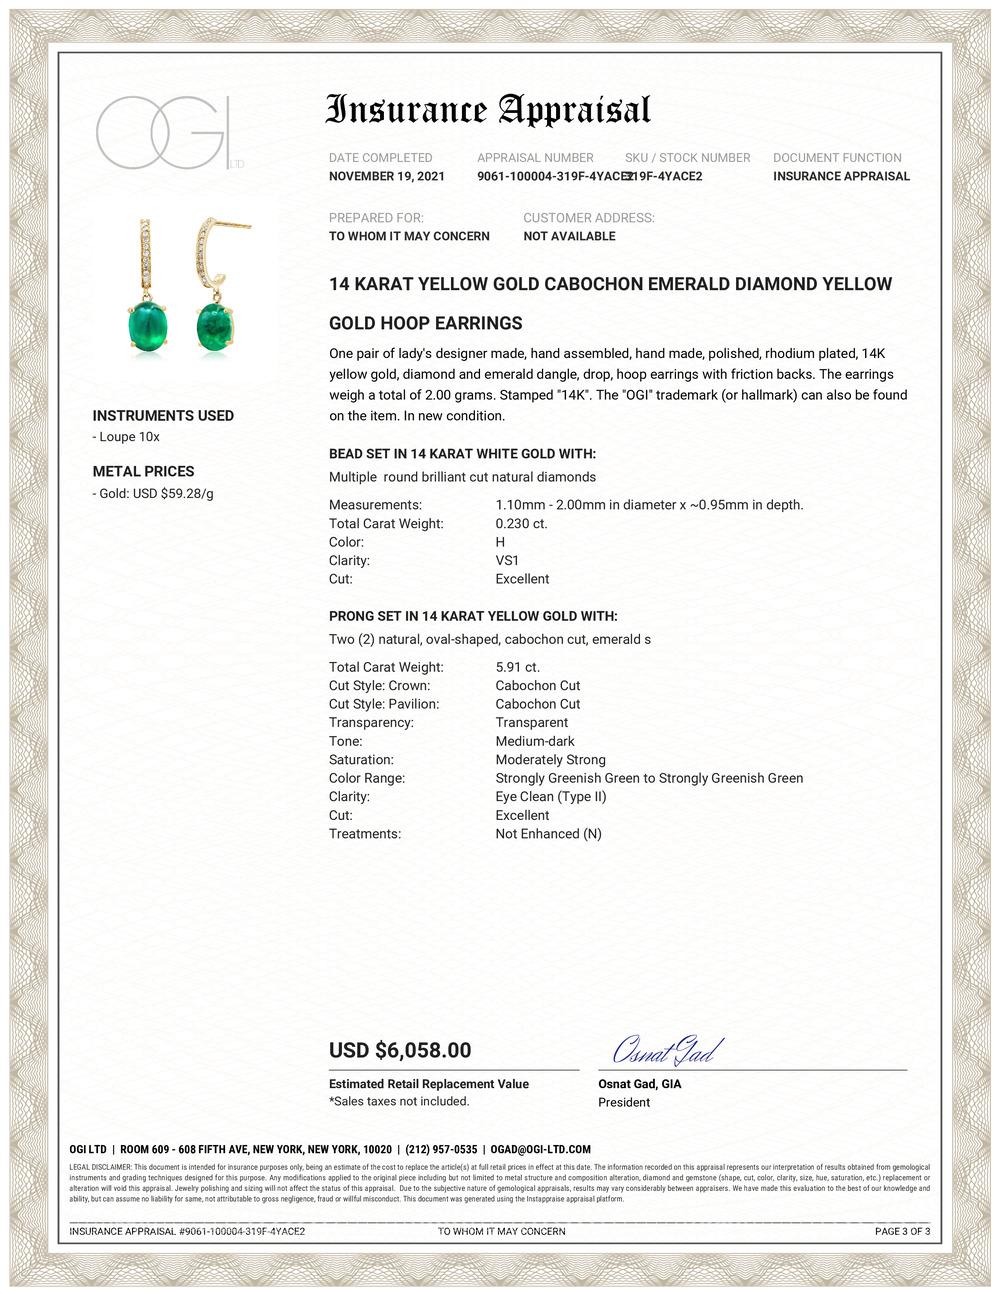 Fourteen karats yellow gold drop hoop earrings 
Two cushion-shaped cabochon emerald weighing 5.91 carat 
Diamonds weighing 0.20 carat 
Emerald hue tone color is of grass green
One of a kind earrings 
New Earrings 
Handmade in the USA
Earrings hoops